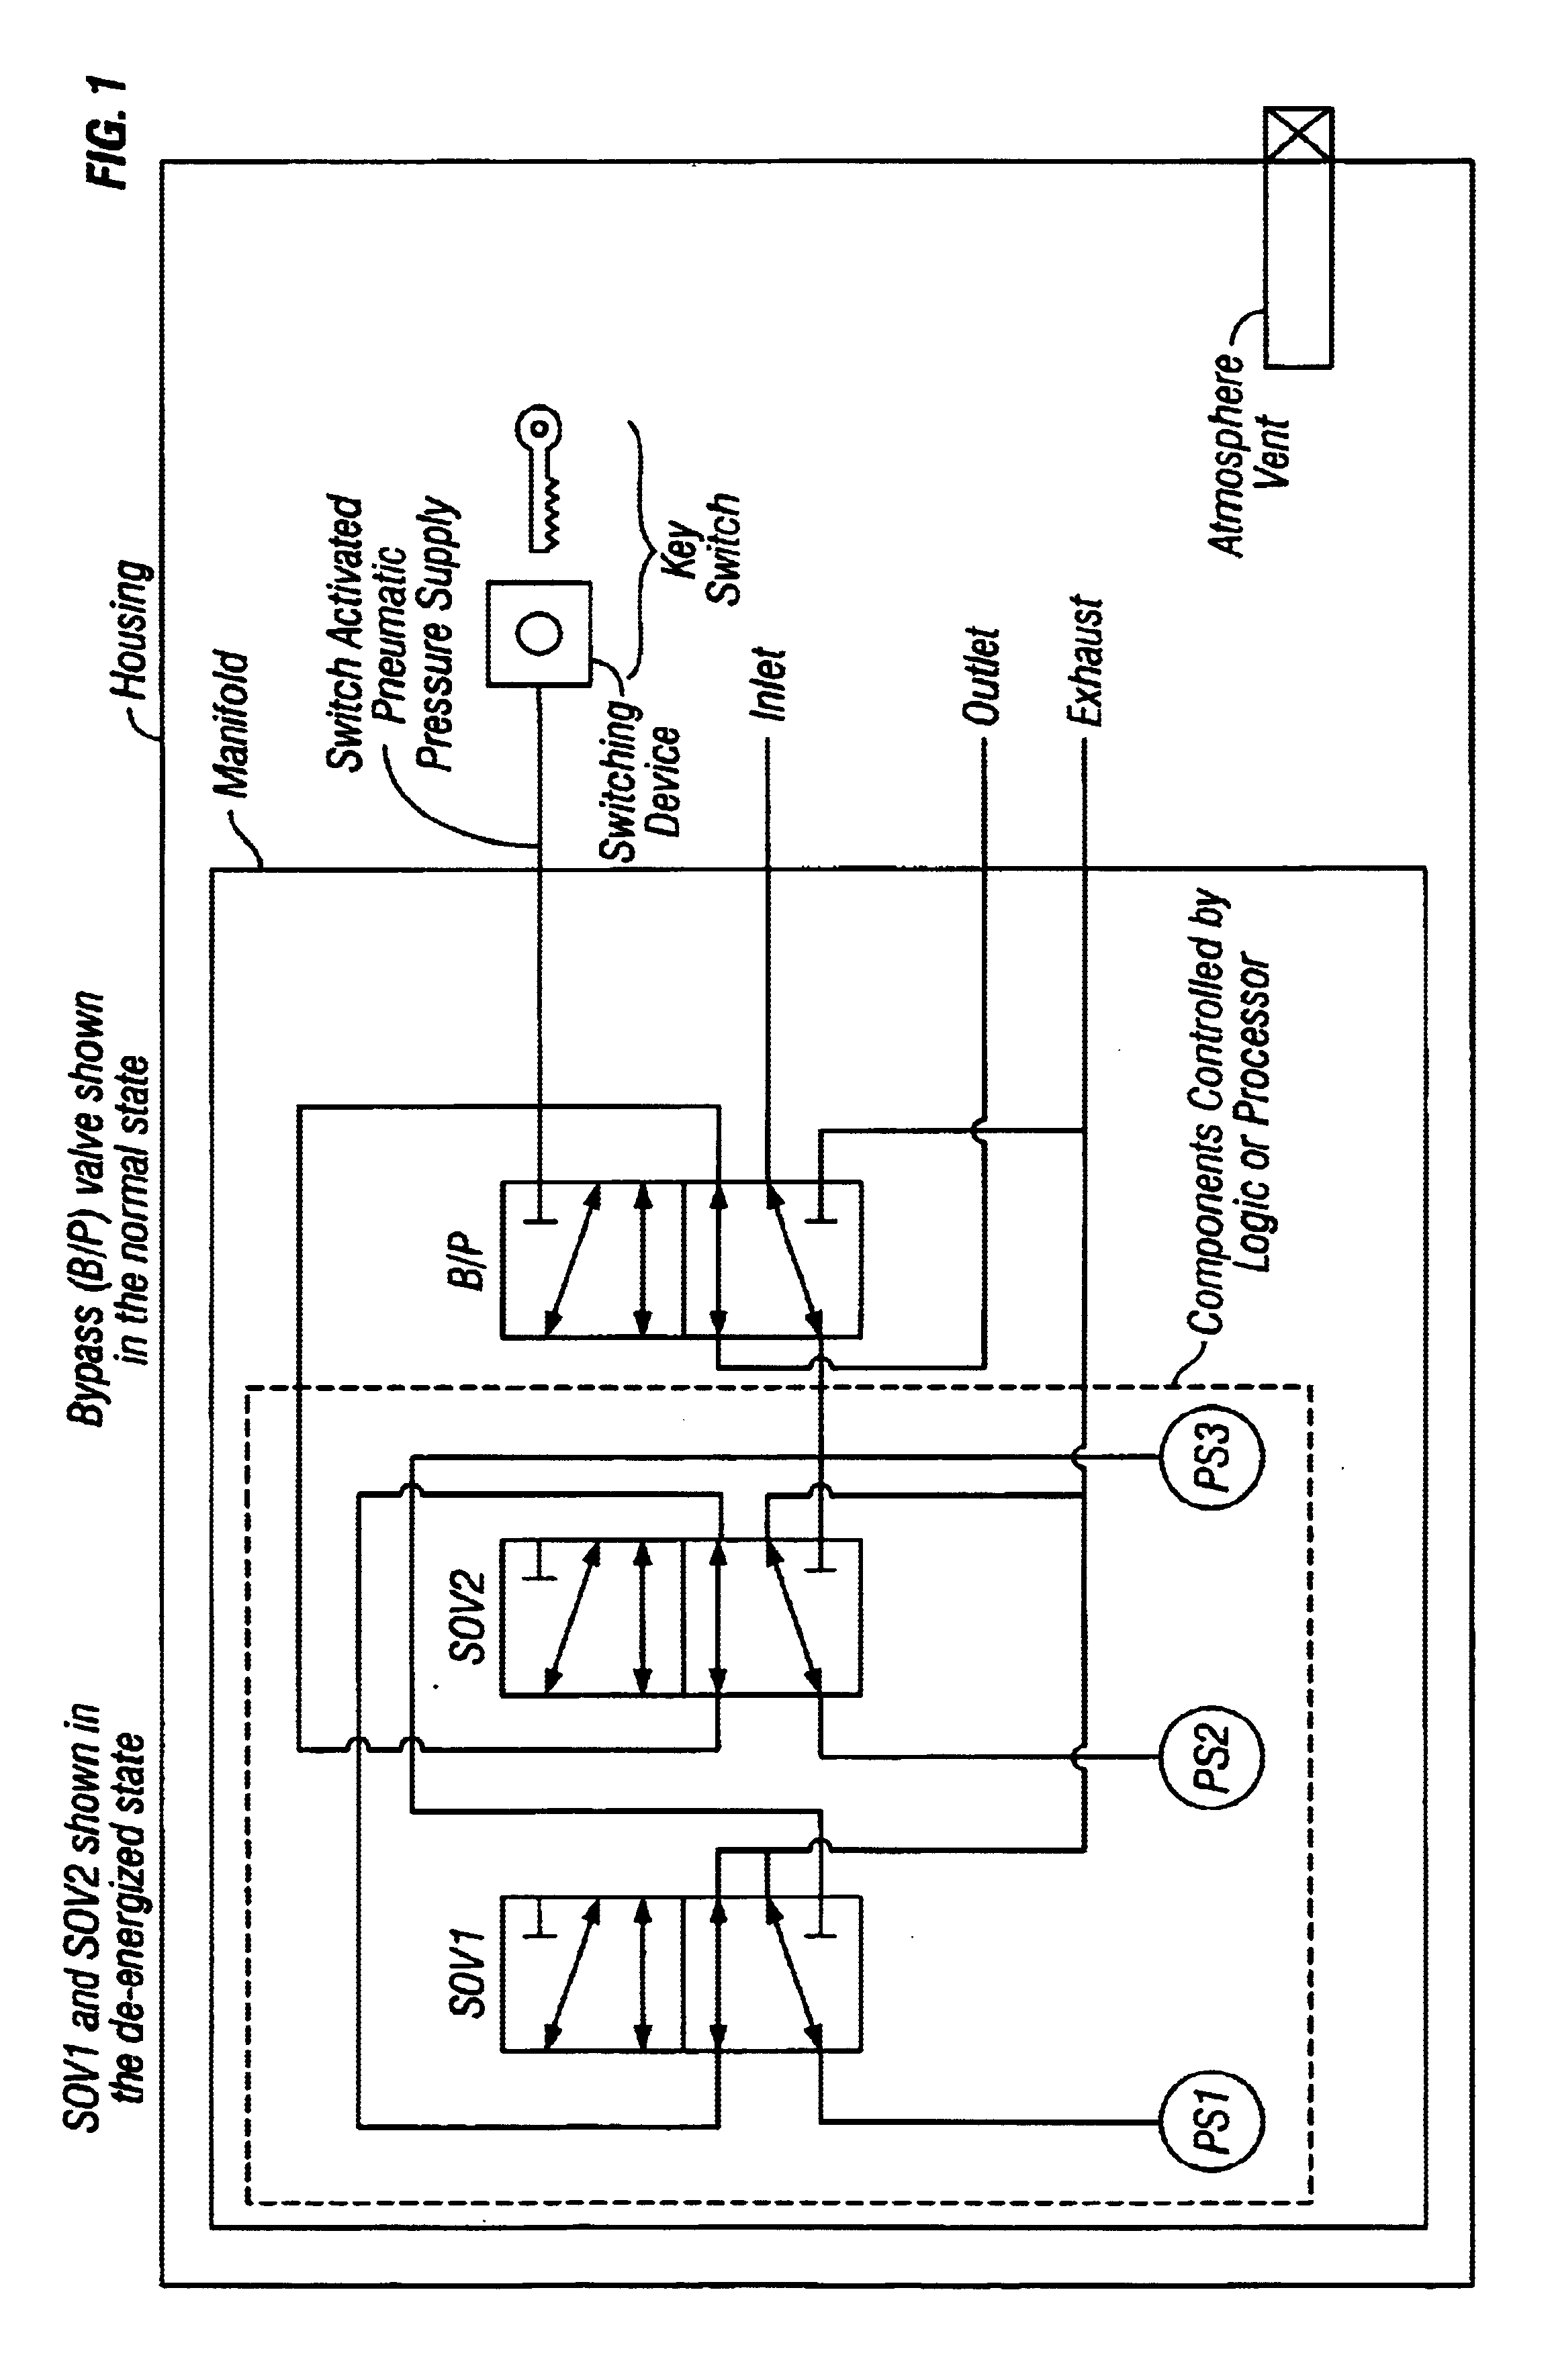 Variable function voting solenoid-operated valve apparatus and testing method therefor